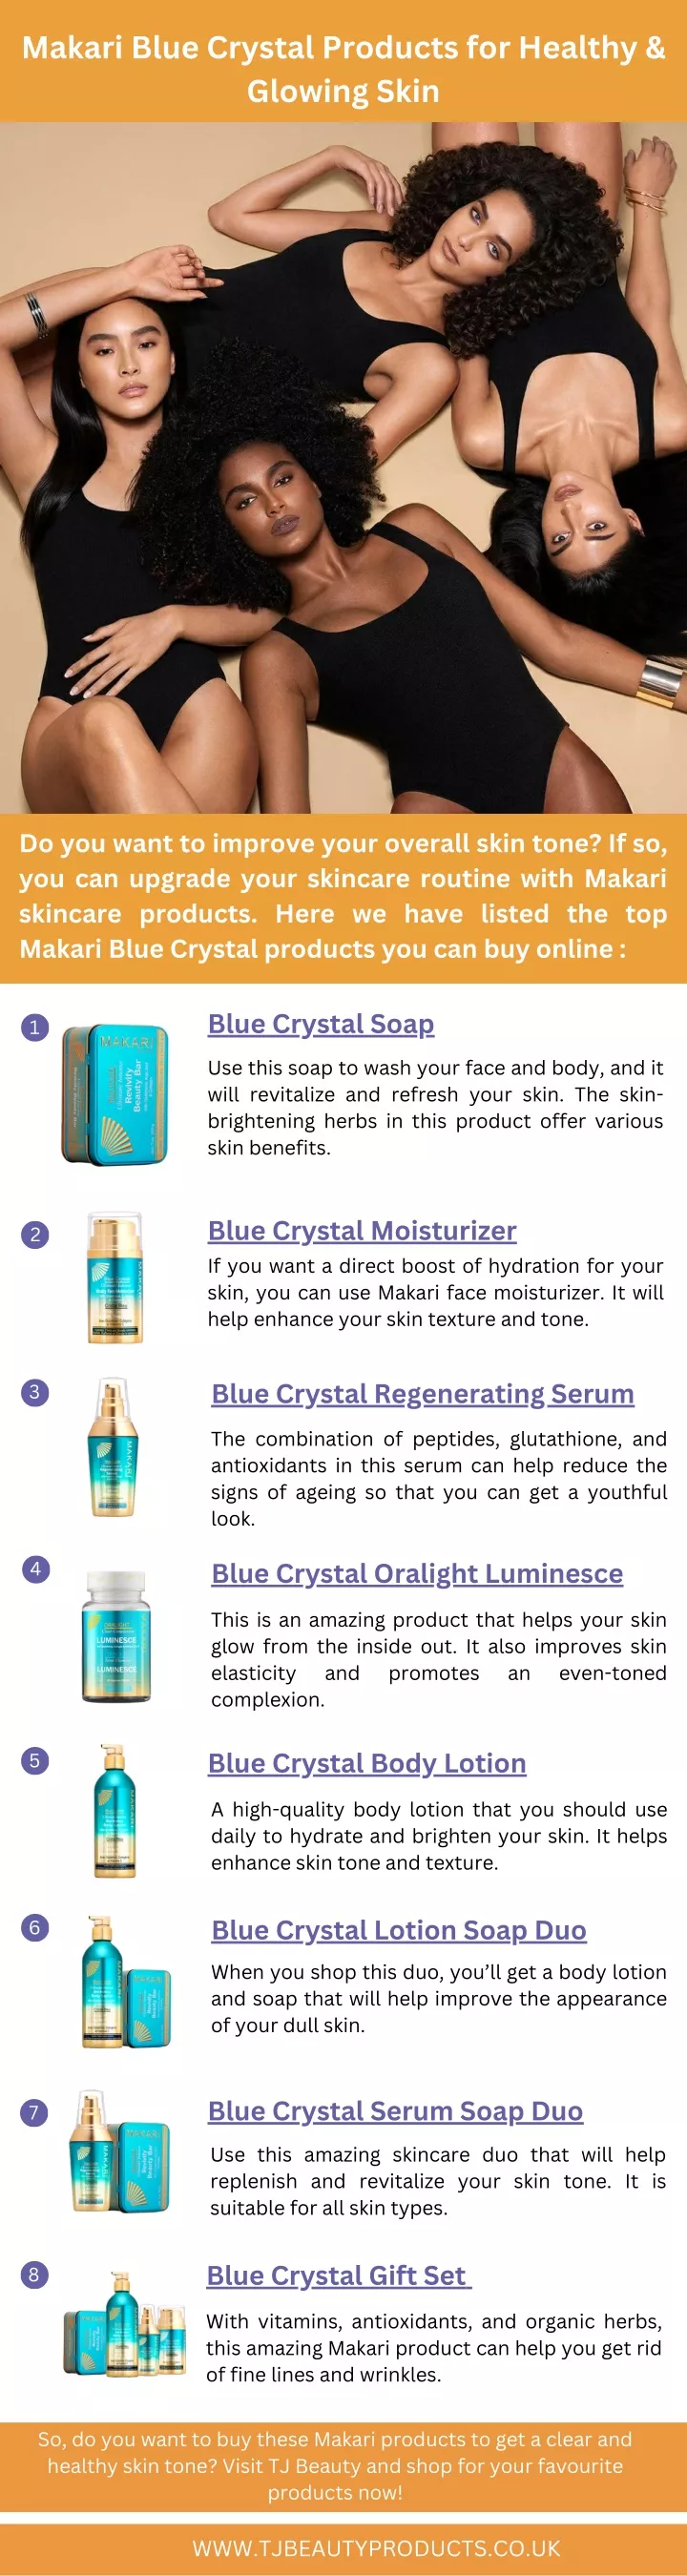 makari blue crystal products for healthy glowing